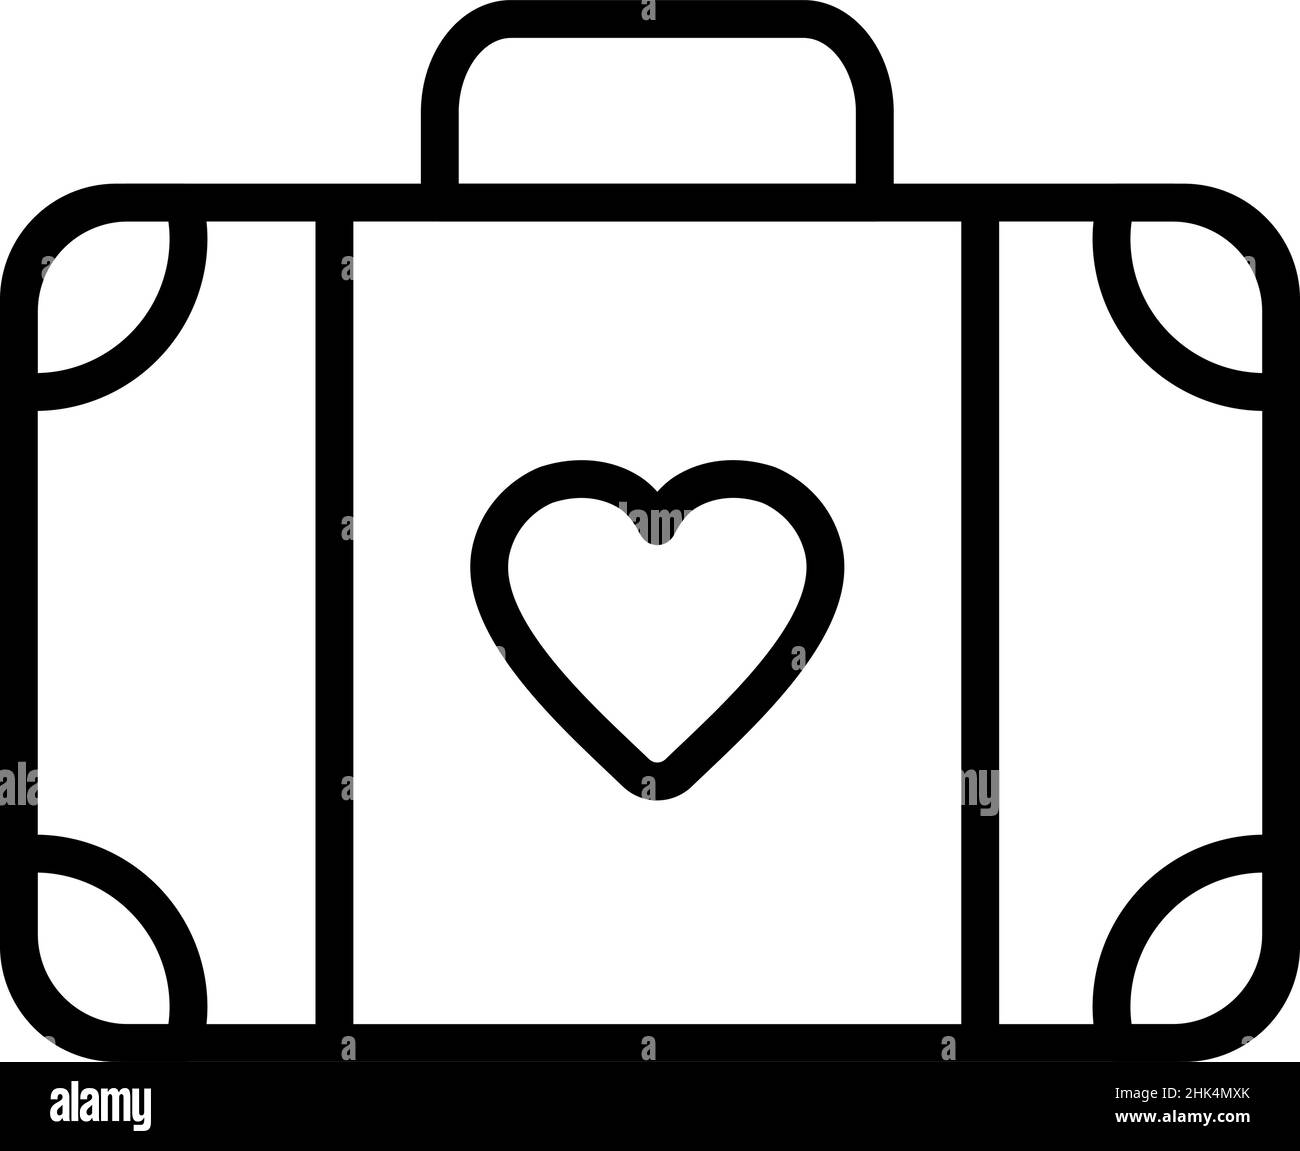 Suitcase icon on white background, vector illustration Stock Vector